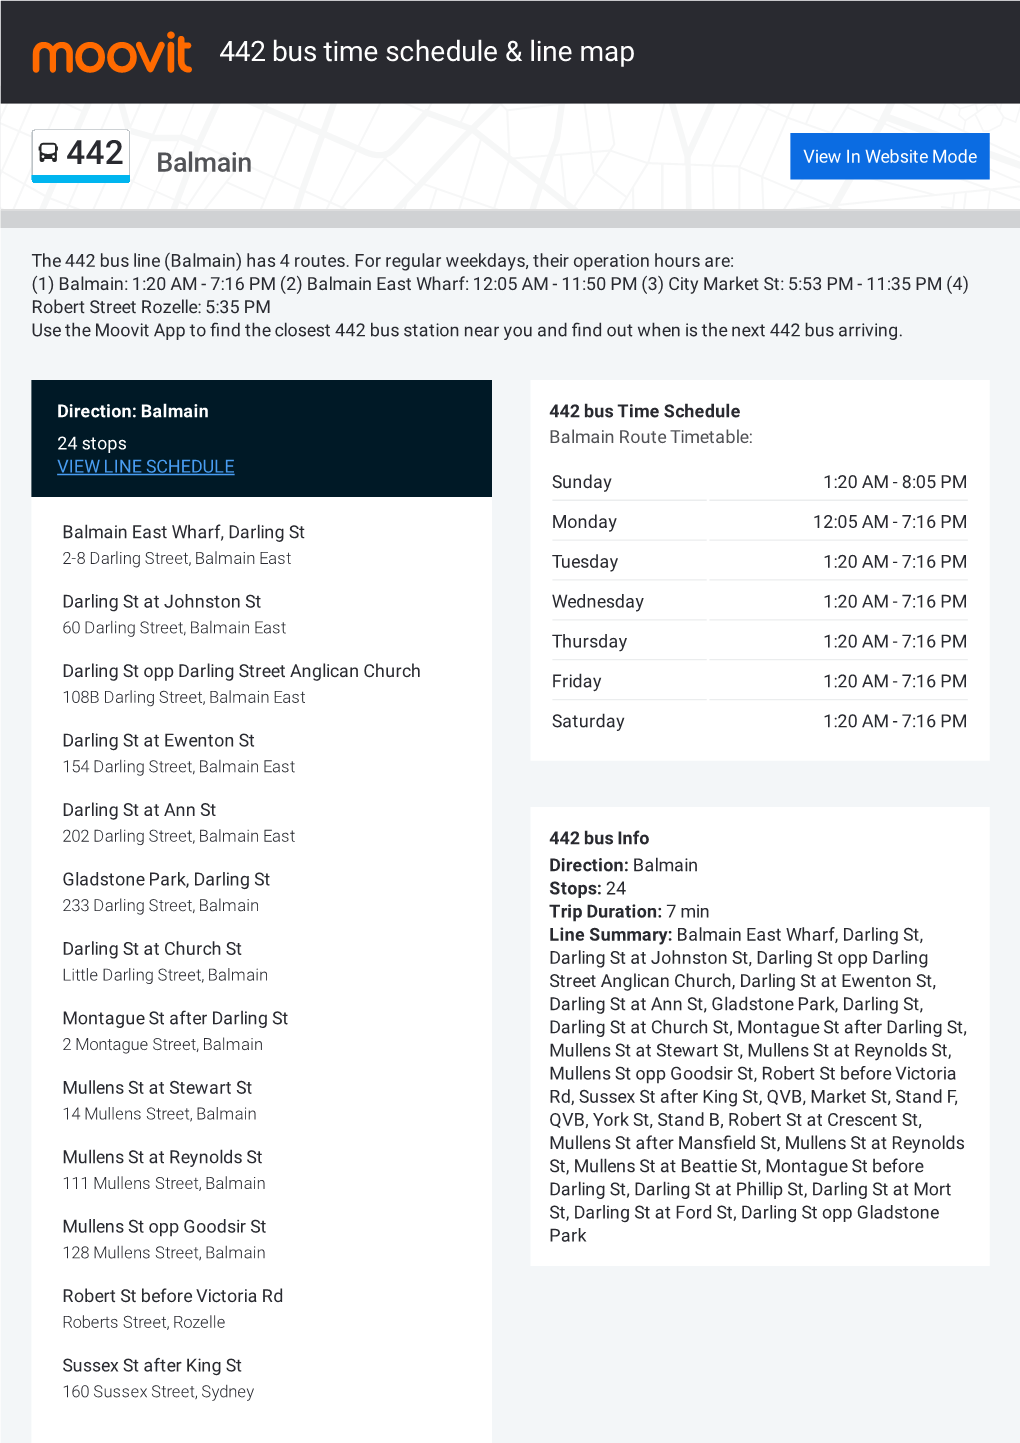 442 Bus Time Schedule & Line Route